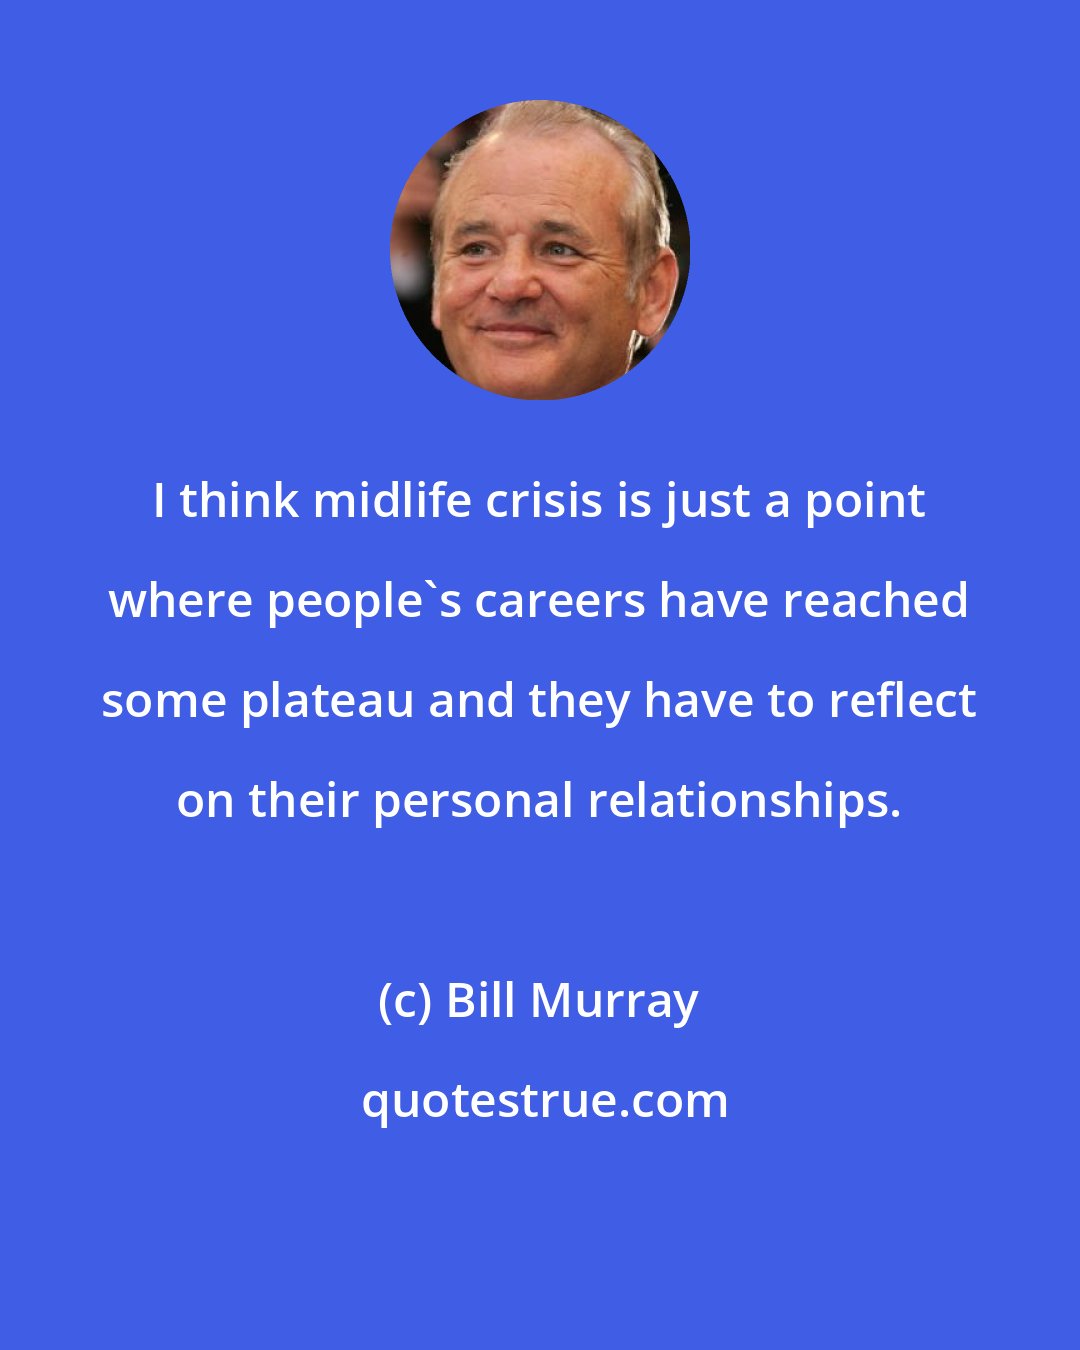 Bill Murray: I think midlife crisis is just a point where people's careers have reached some plateau and they have to reflect on their personal relationships.